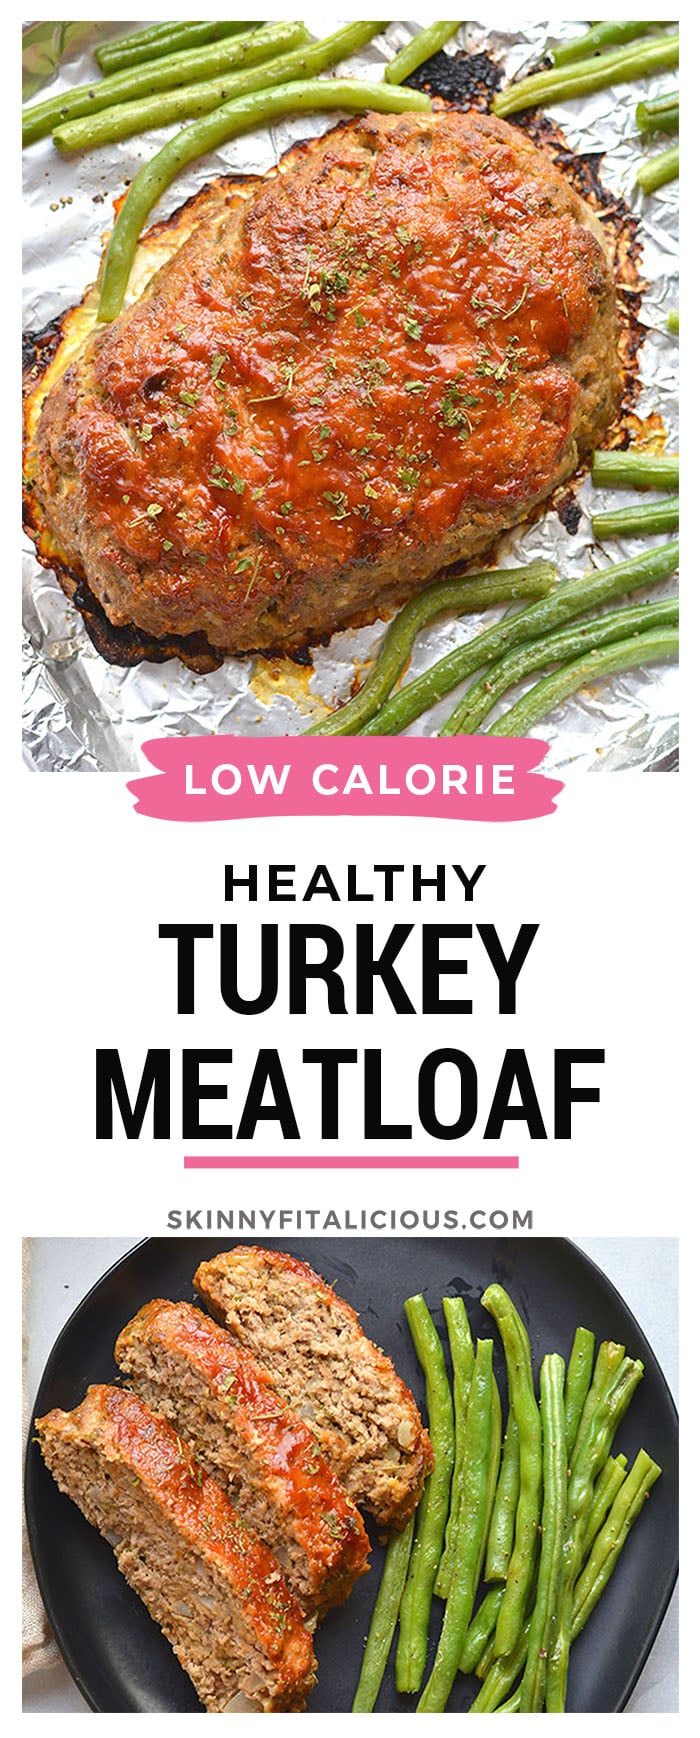 Healthy Turkey Meatloaf baked on a sheet pan. This easy low calorie dinner recipe is simple to make, egg free, hearty, gluten free and family approved! Low Calorie + Low Carb + Gluten Free